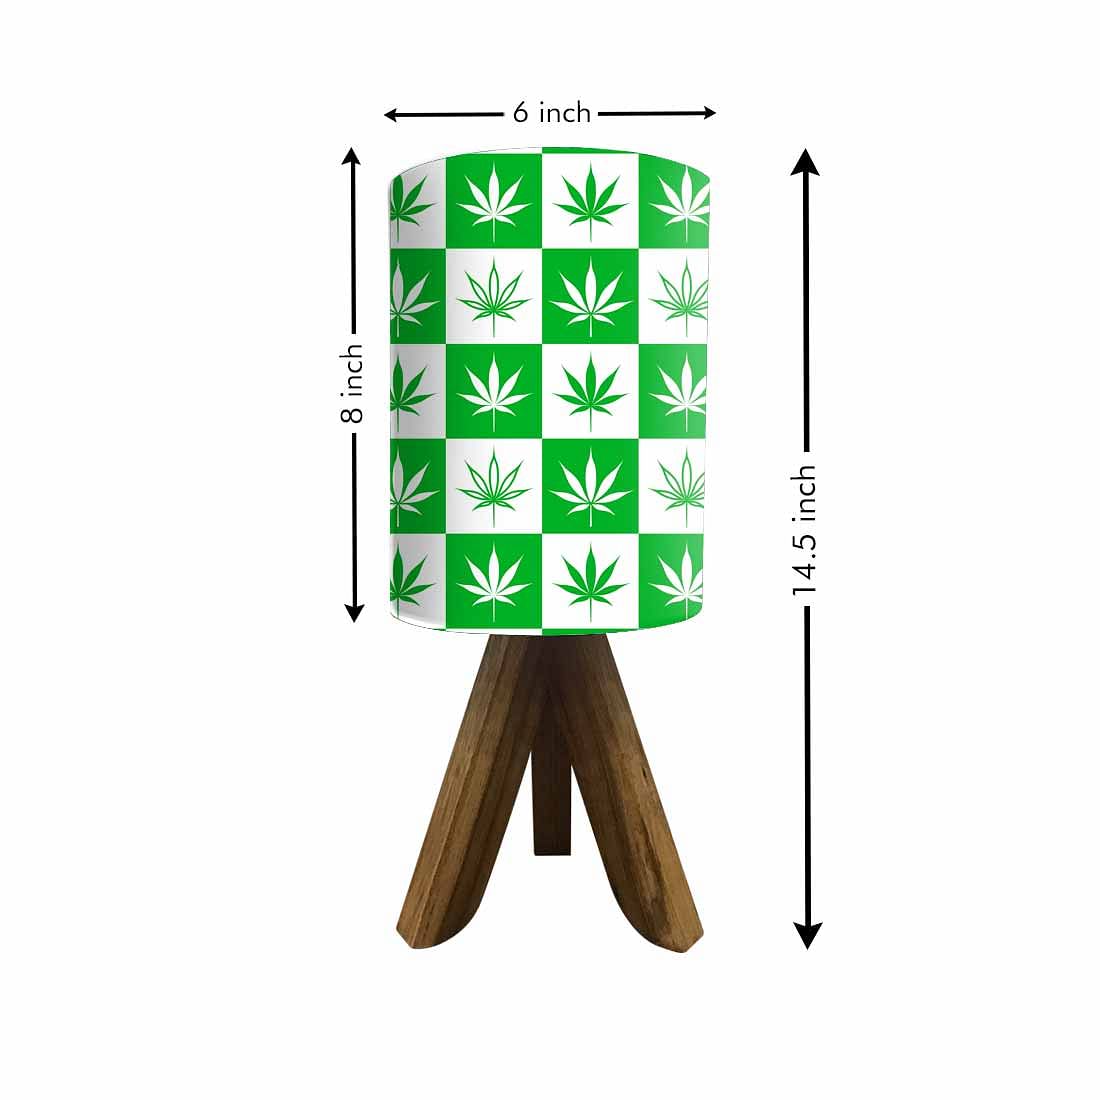 Wooden Stick Lamp Base For Bedroom - 4:20 Happy Times Nutcase